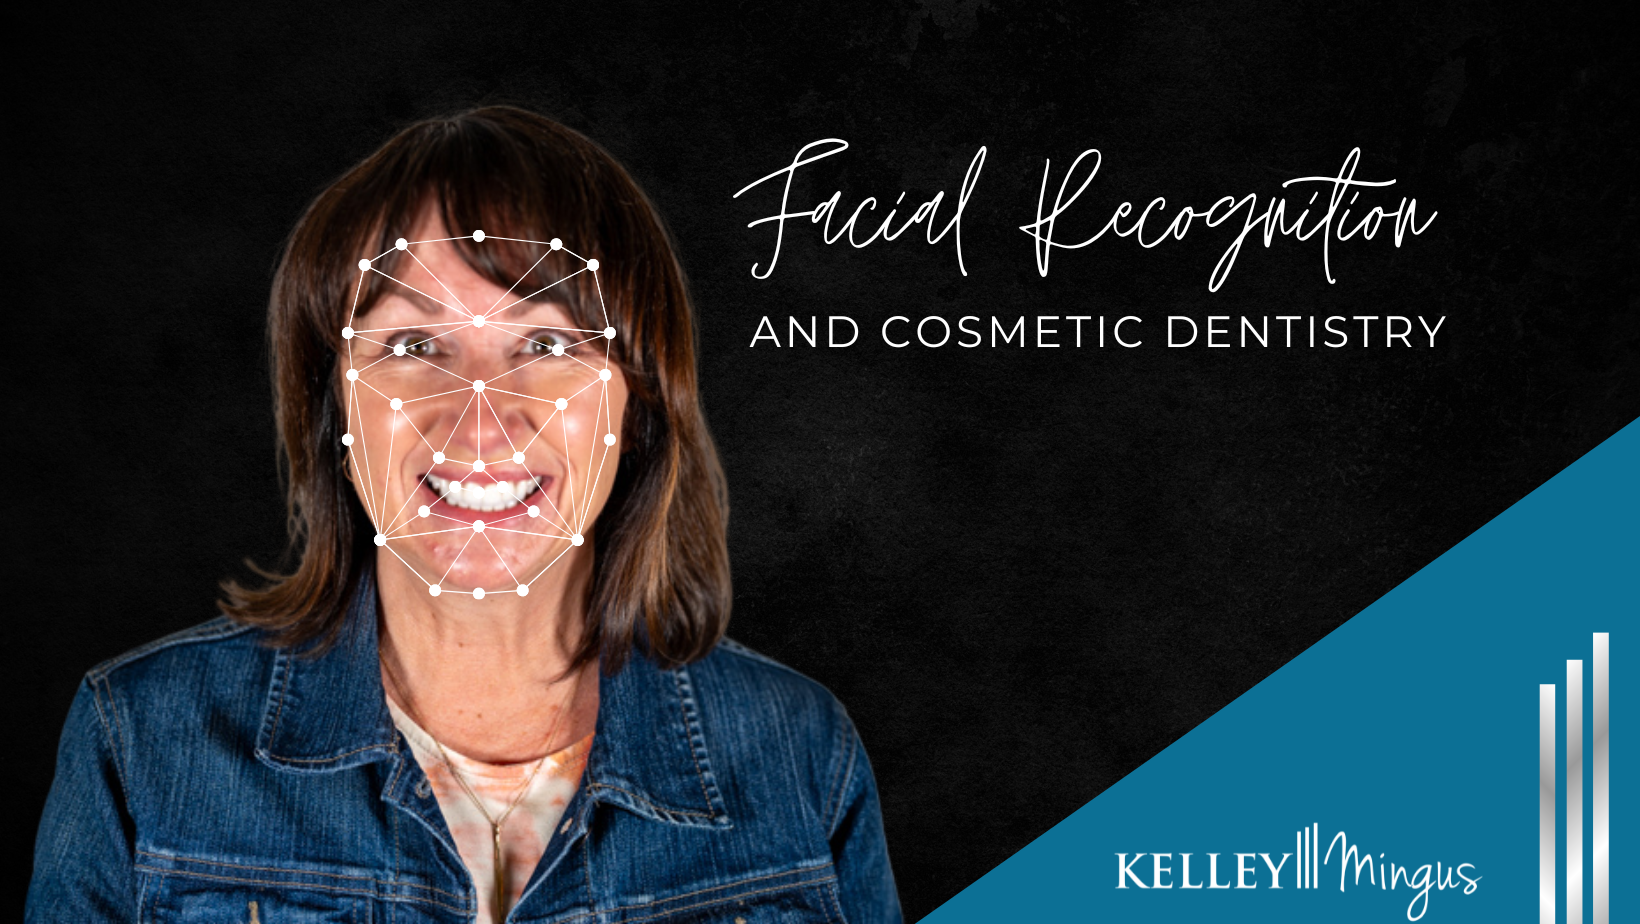 A woman with a facial recognition map over her smiling face, standing against a dark background with text reading "Facial Recognition and cosmetic dentistry" and a logo for Kelley Mingus.